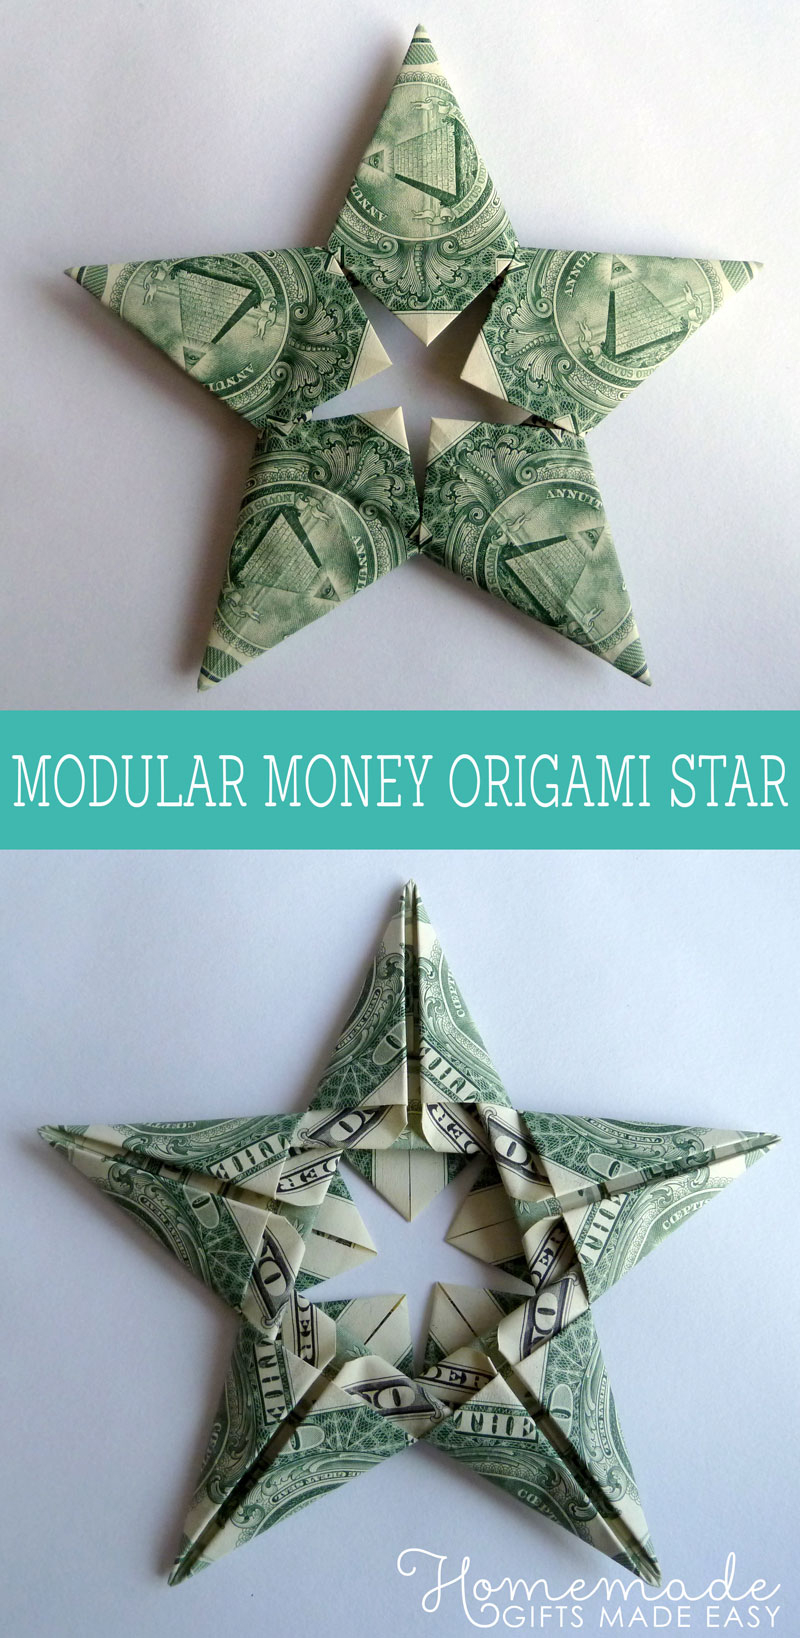 Origami Money Folding Instructions Modular Money Origami Star From 5 Bills How To Fold Step Step